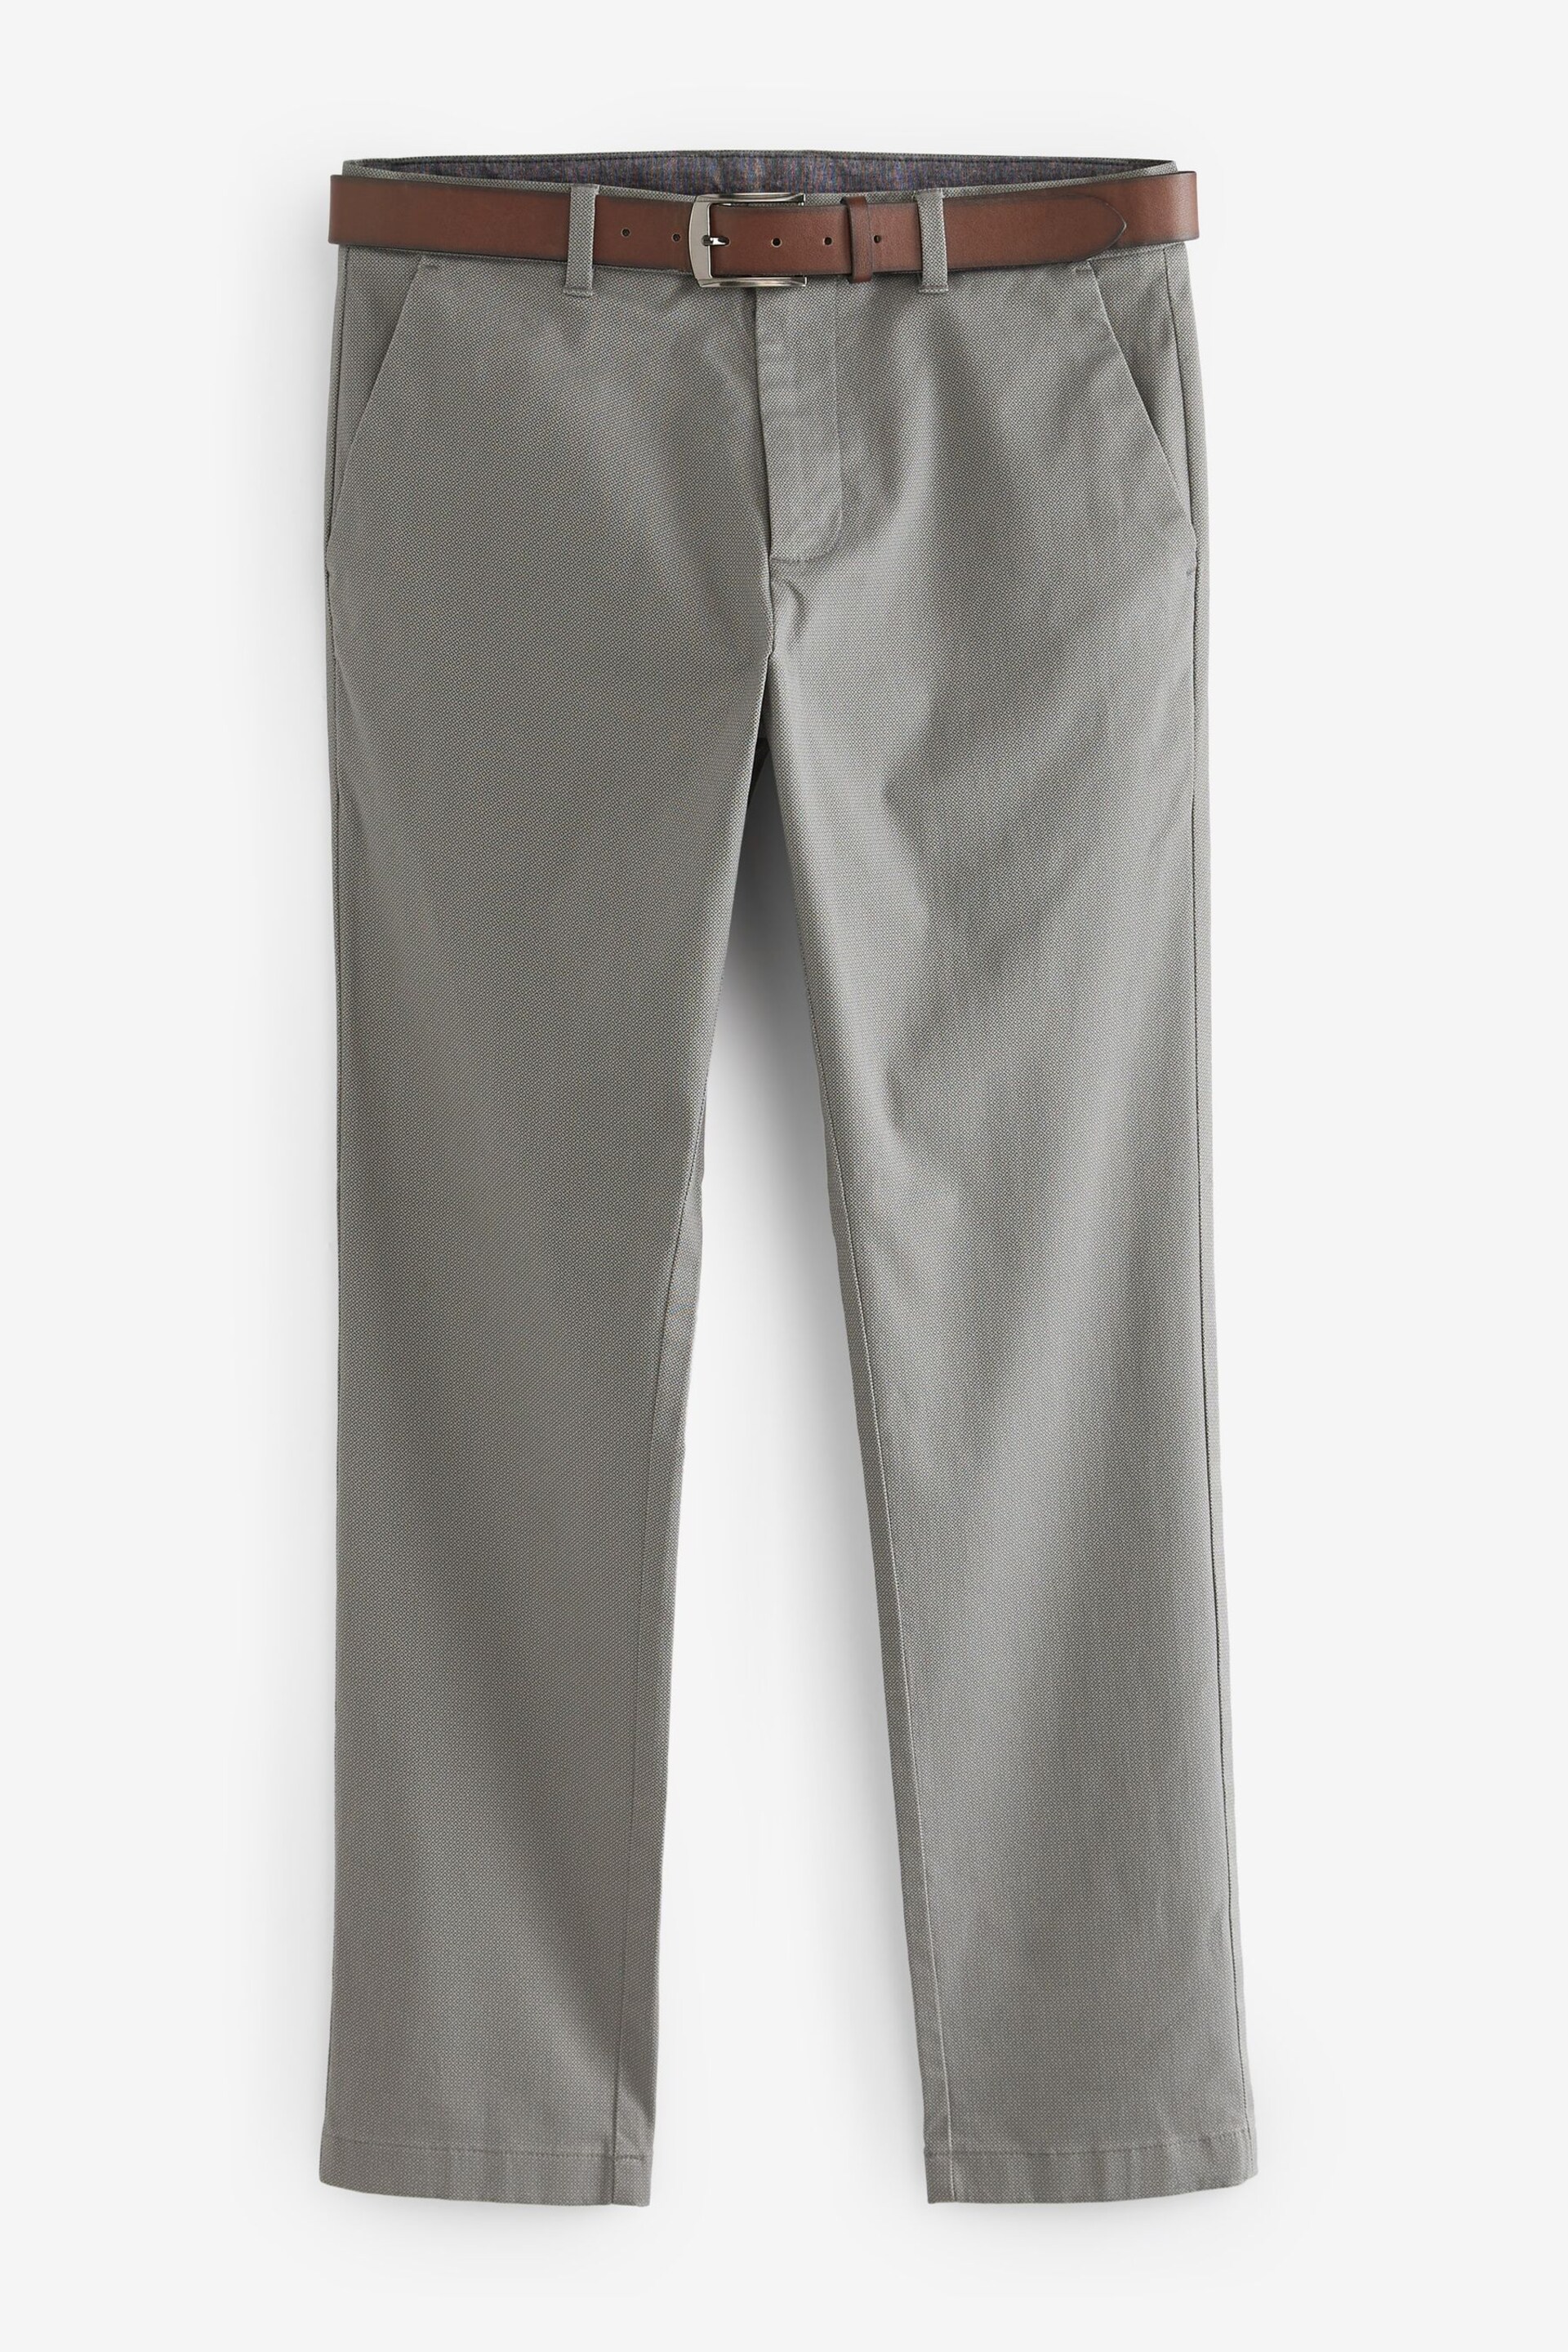 Grey Slim Printed Belted Soft Touch Chino Trousers - Image 4 of 8